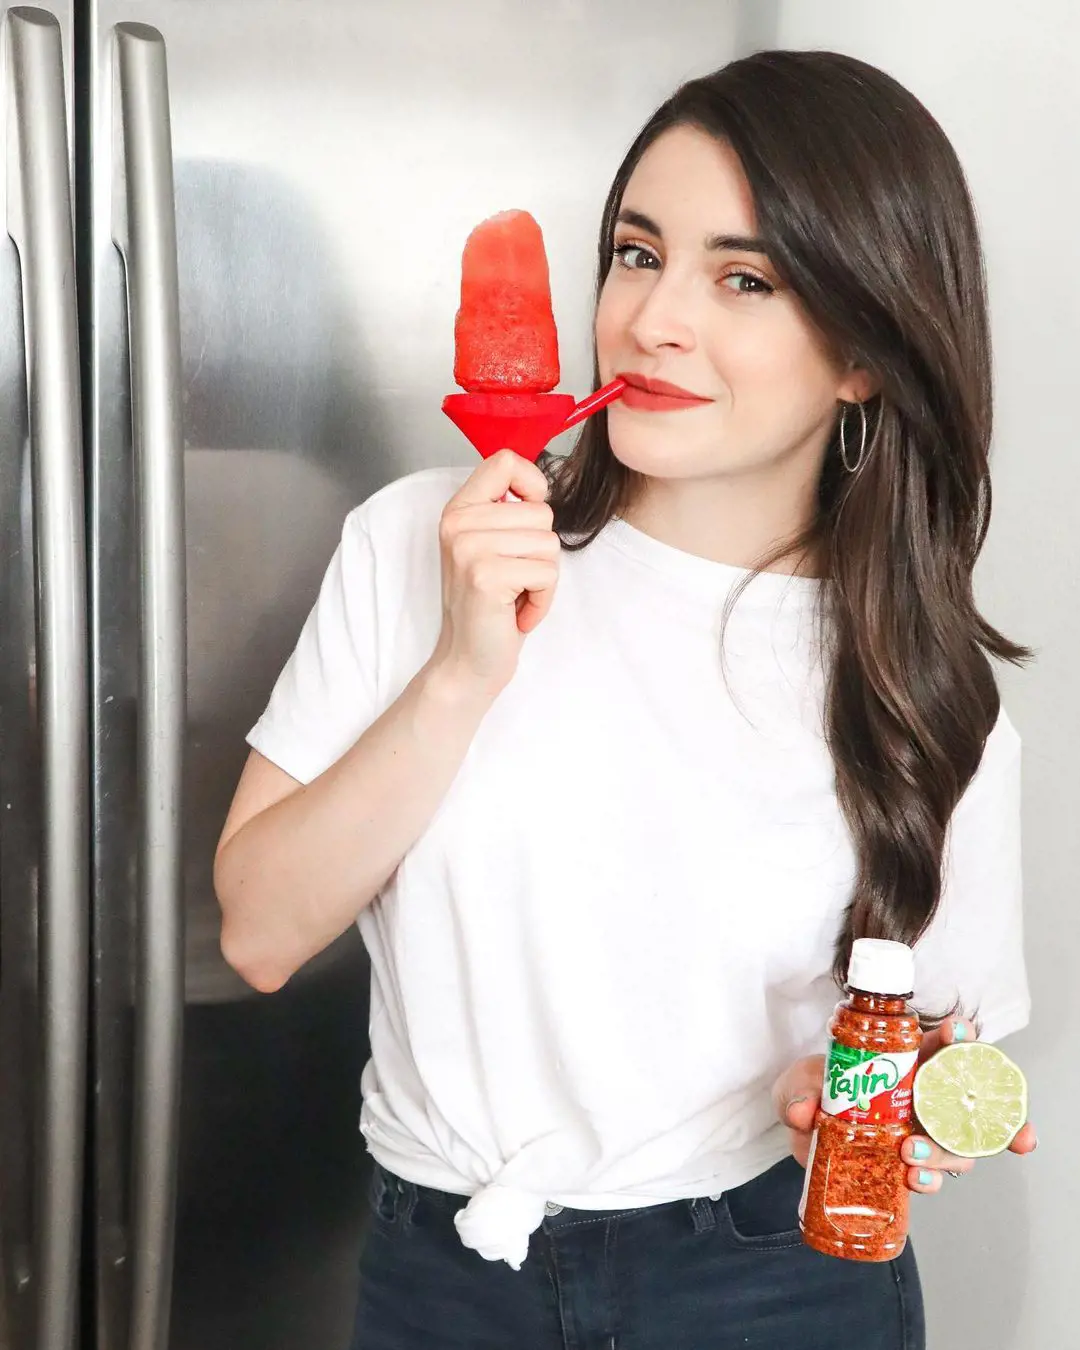 Daniela promoting her YouTube channel and her cookery skills during lockdown 2020. To celebrate first week of summer she added refreshing popsicle recipes for her viewers